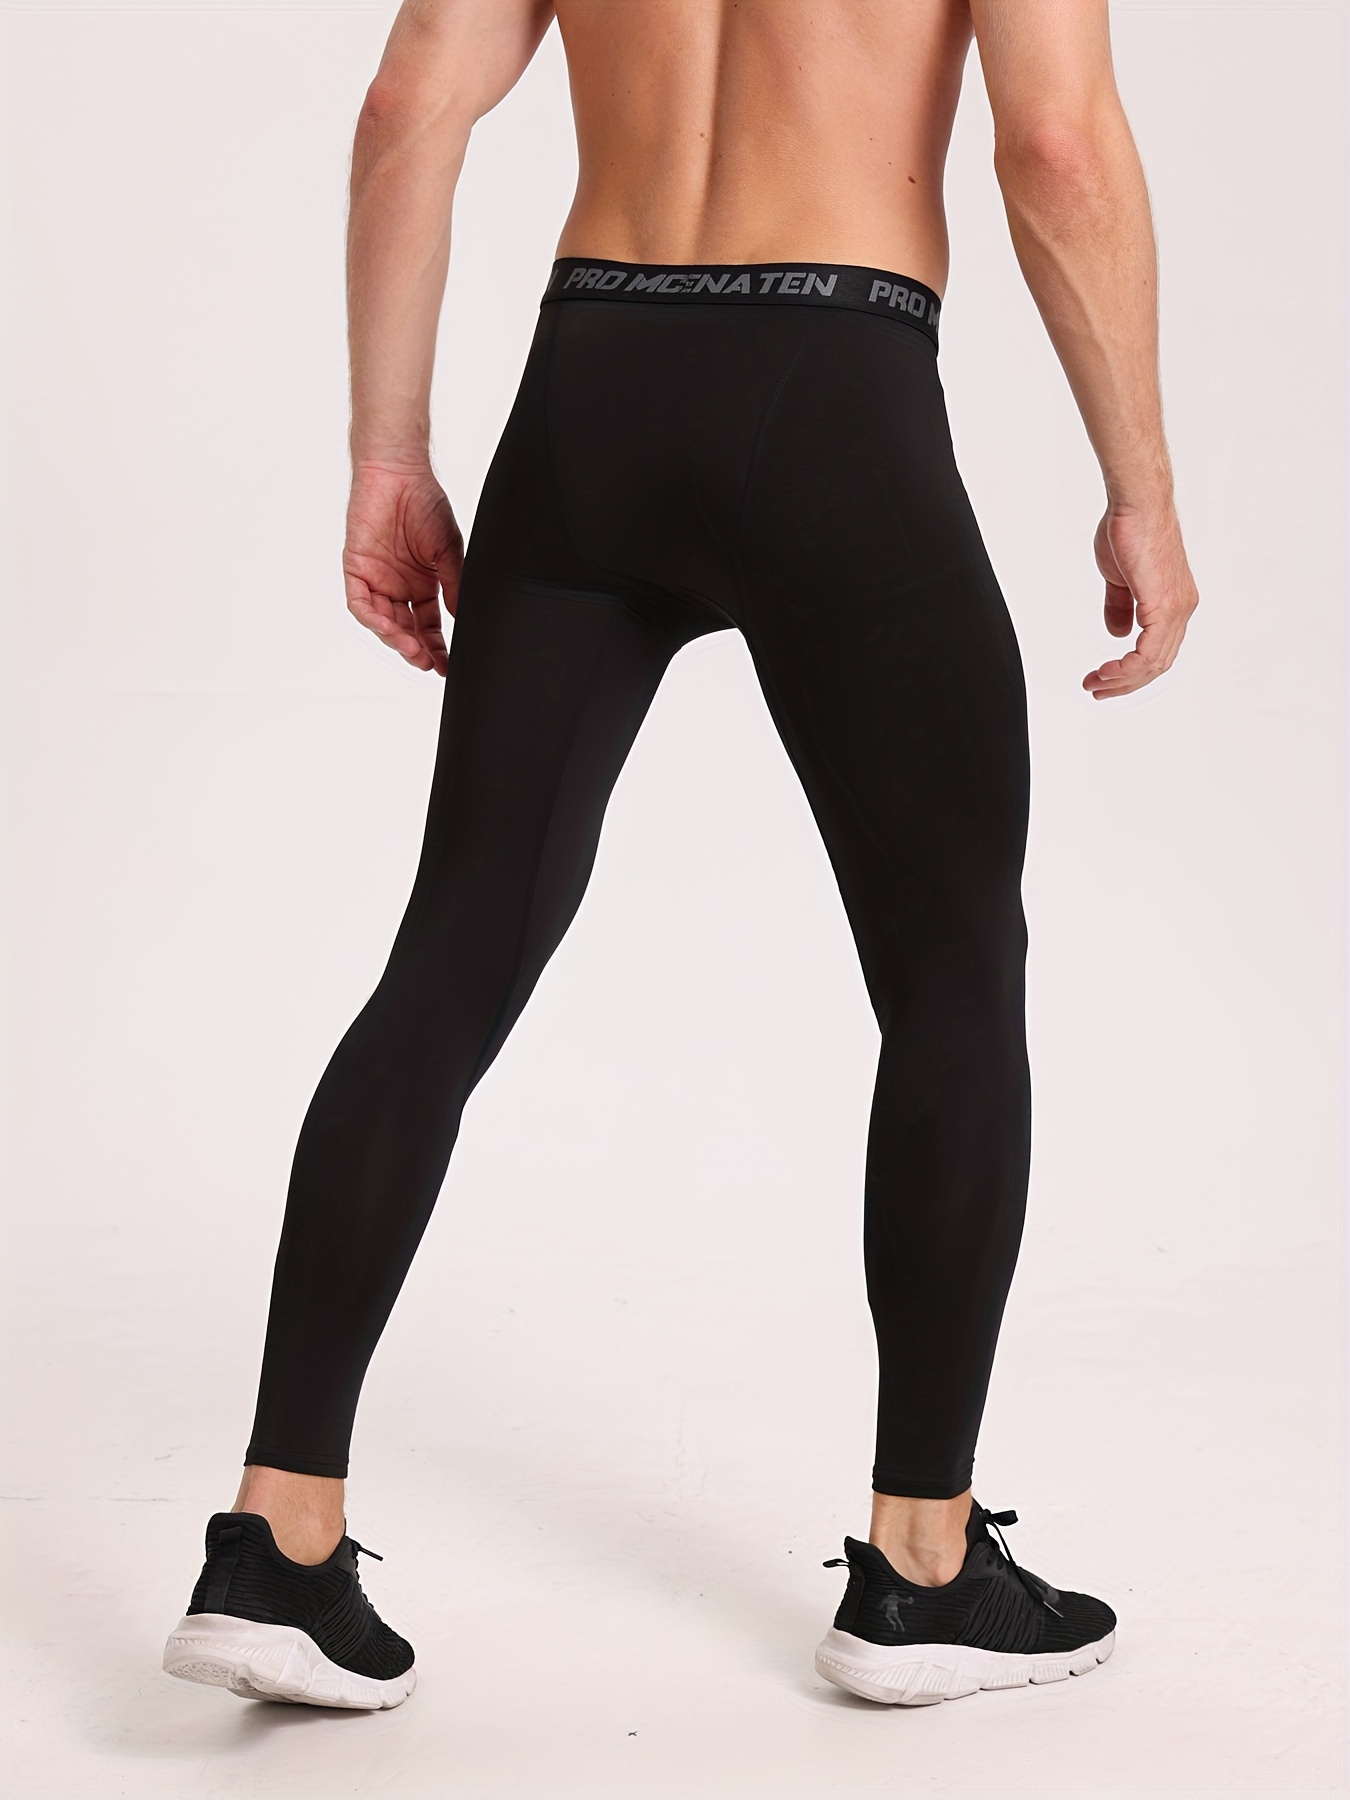 Thermal Sports Tights